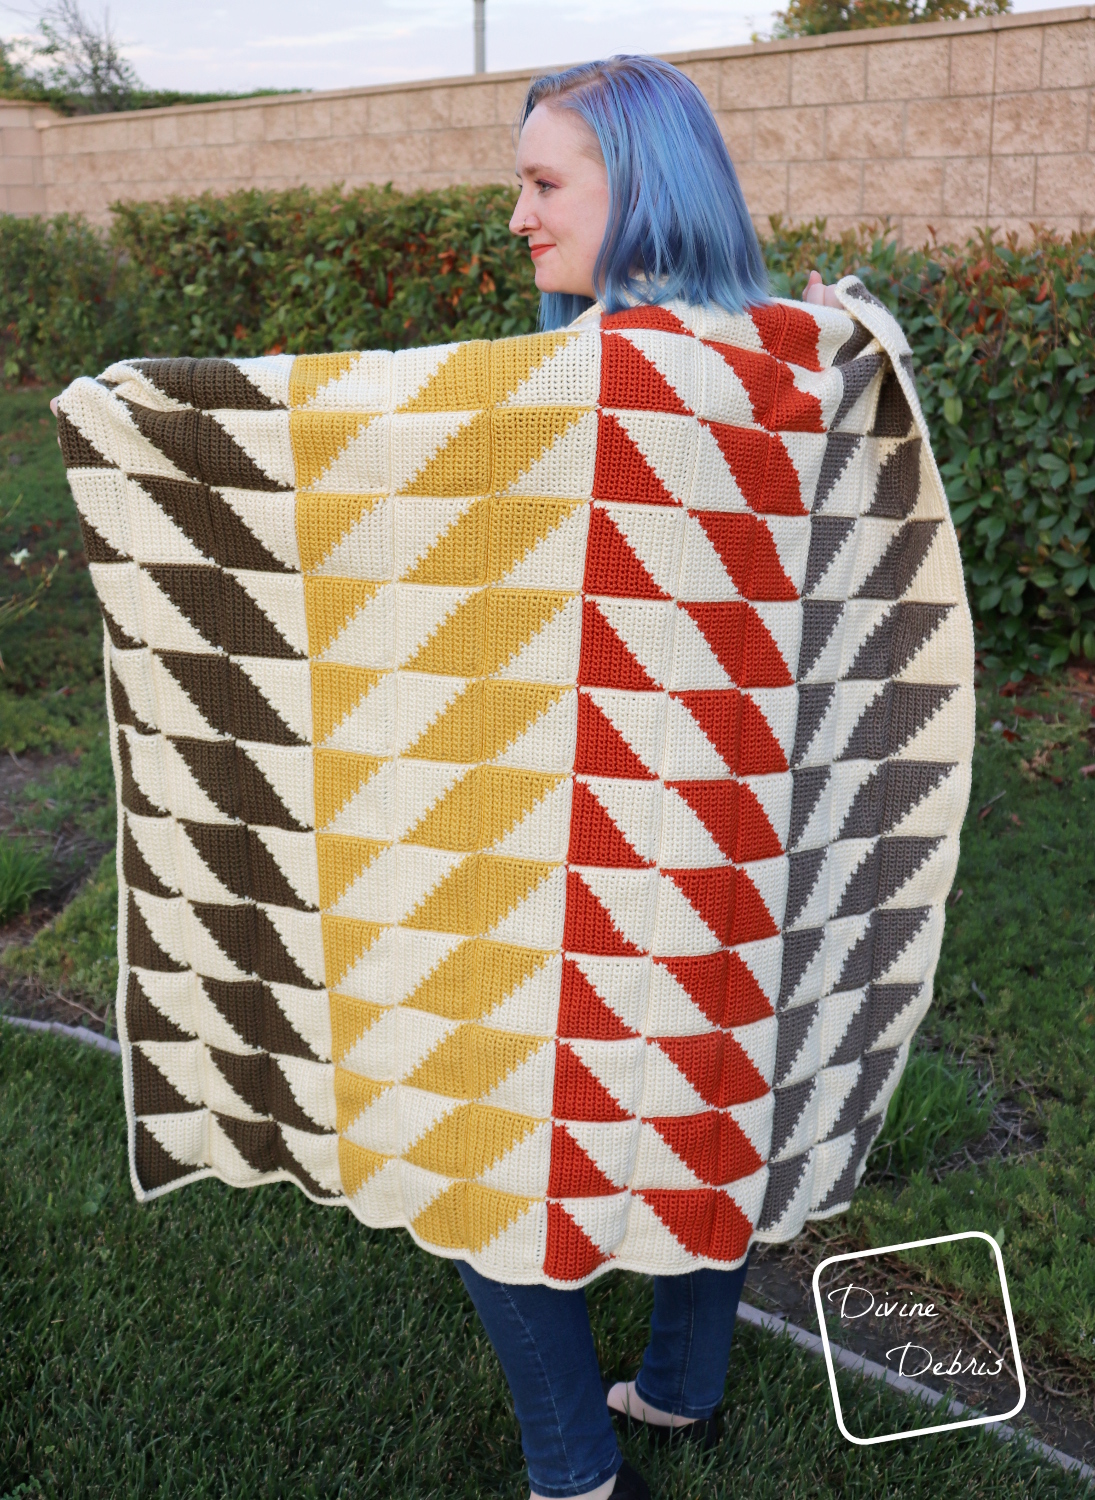 Learn to make this quilt inspired crochet throw blanket, the Divine Diamonds Throw, from a free pattern on DivineDebris.com